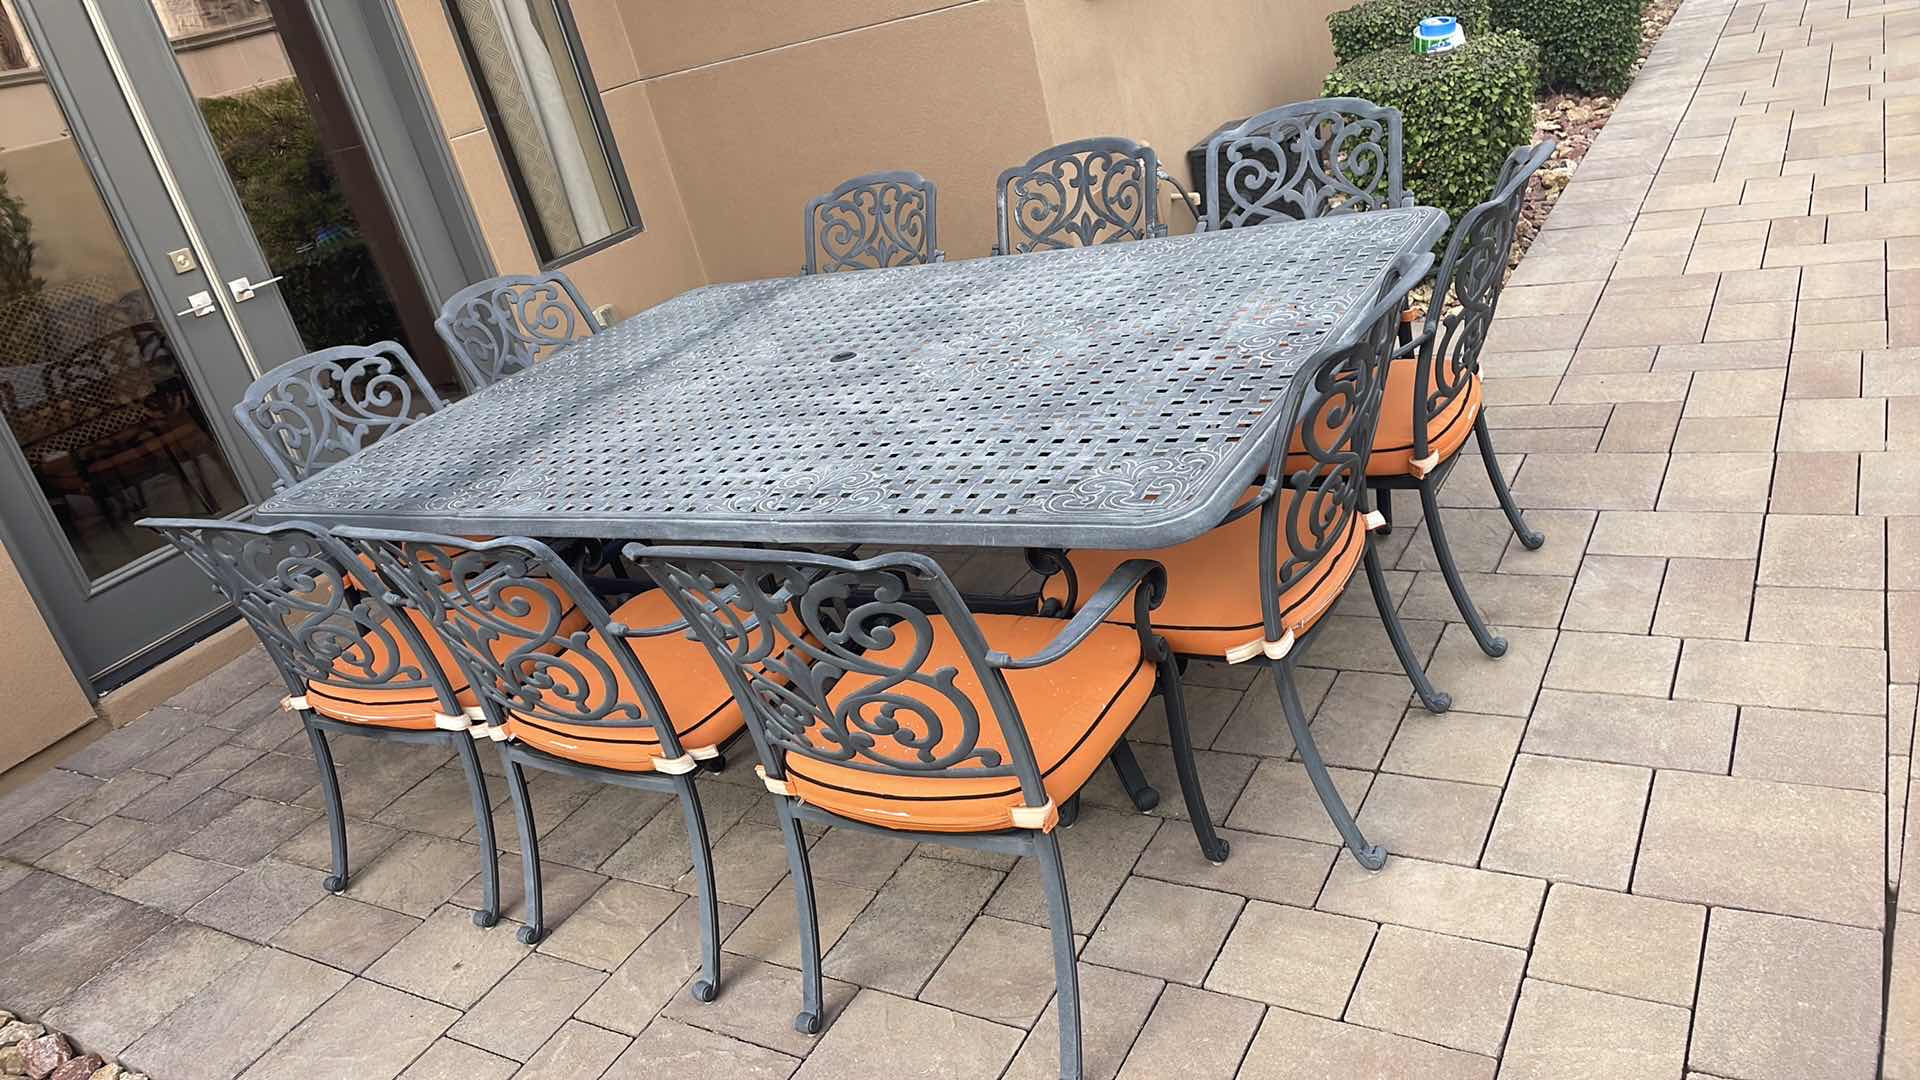 Photo 4 of LUXURY PATIO FURNITURE SET - TABLE 64” X 90” WITH 10 CHAIRS ORANGE CUSHIONS WITH BLACK WELTING